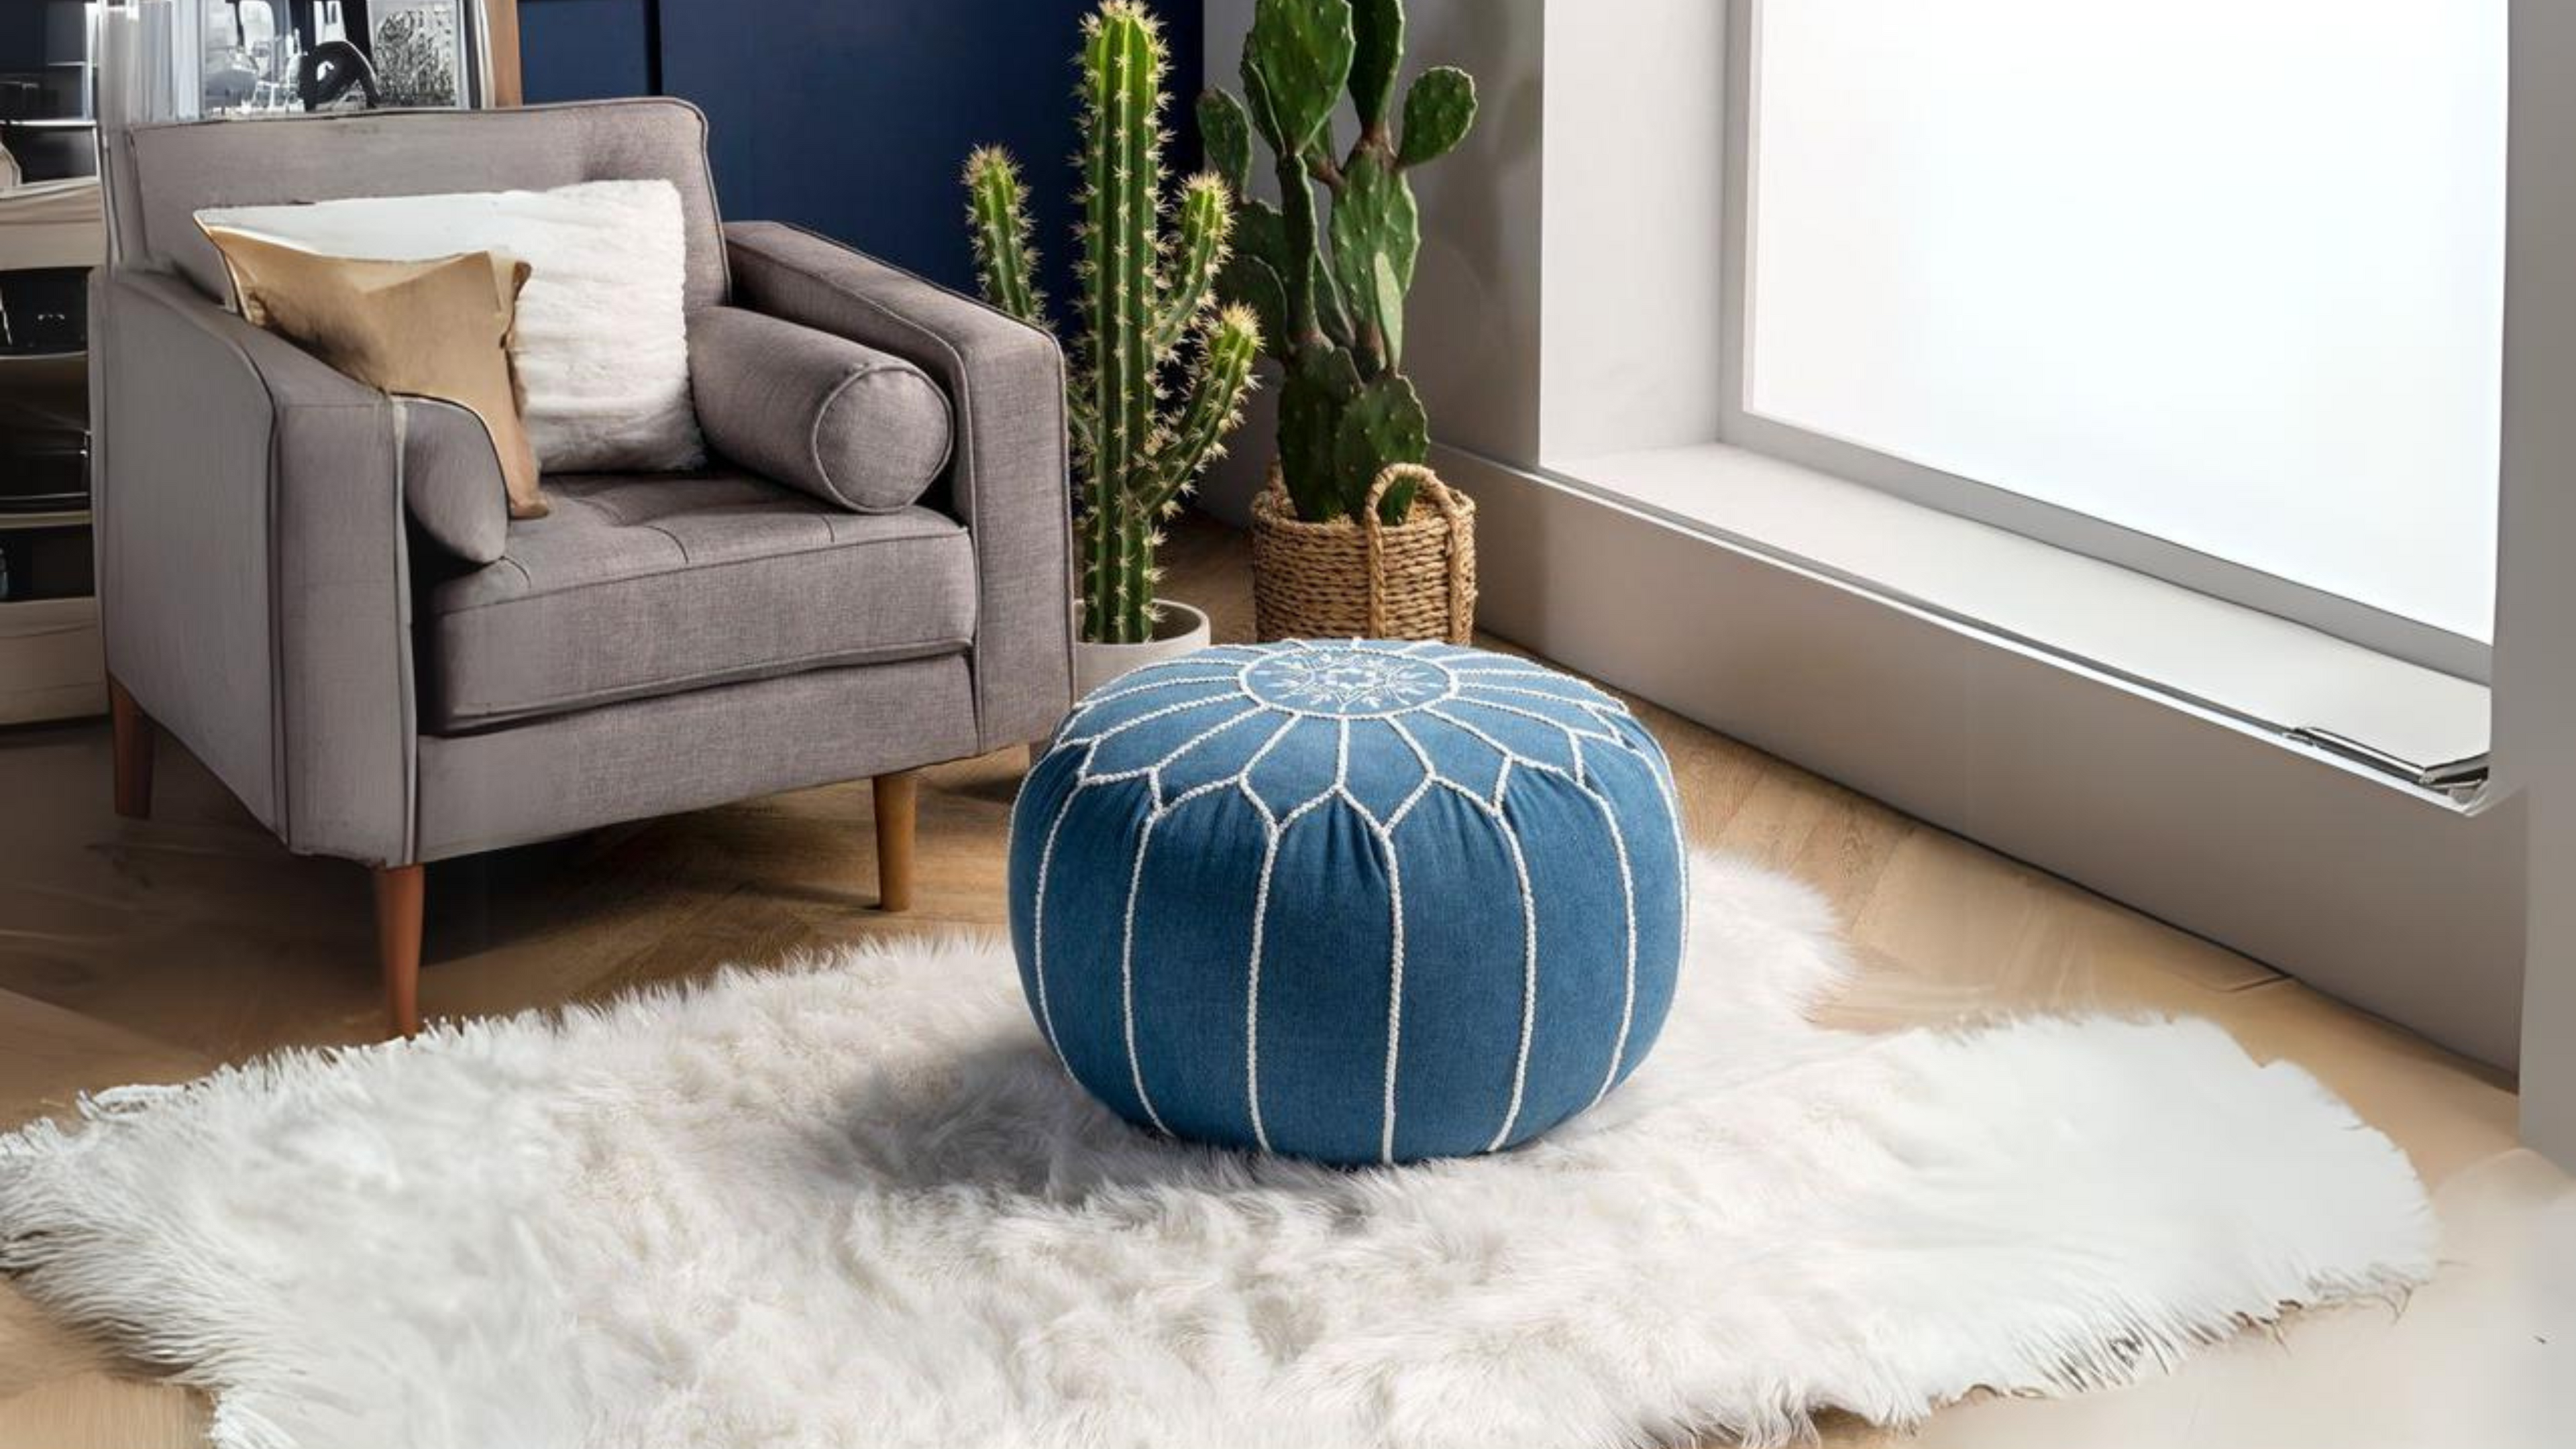 image of blue moroccan leather pouf in moroccan setting